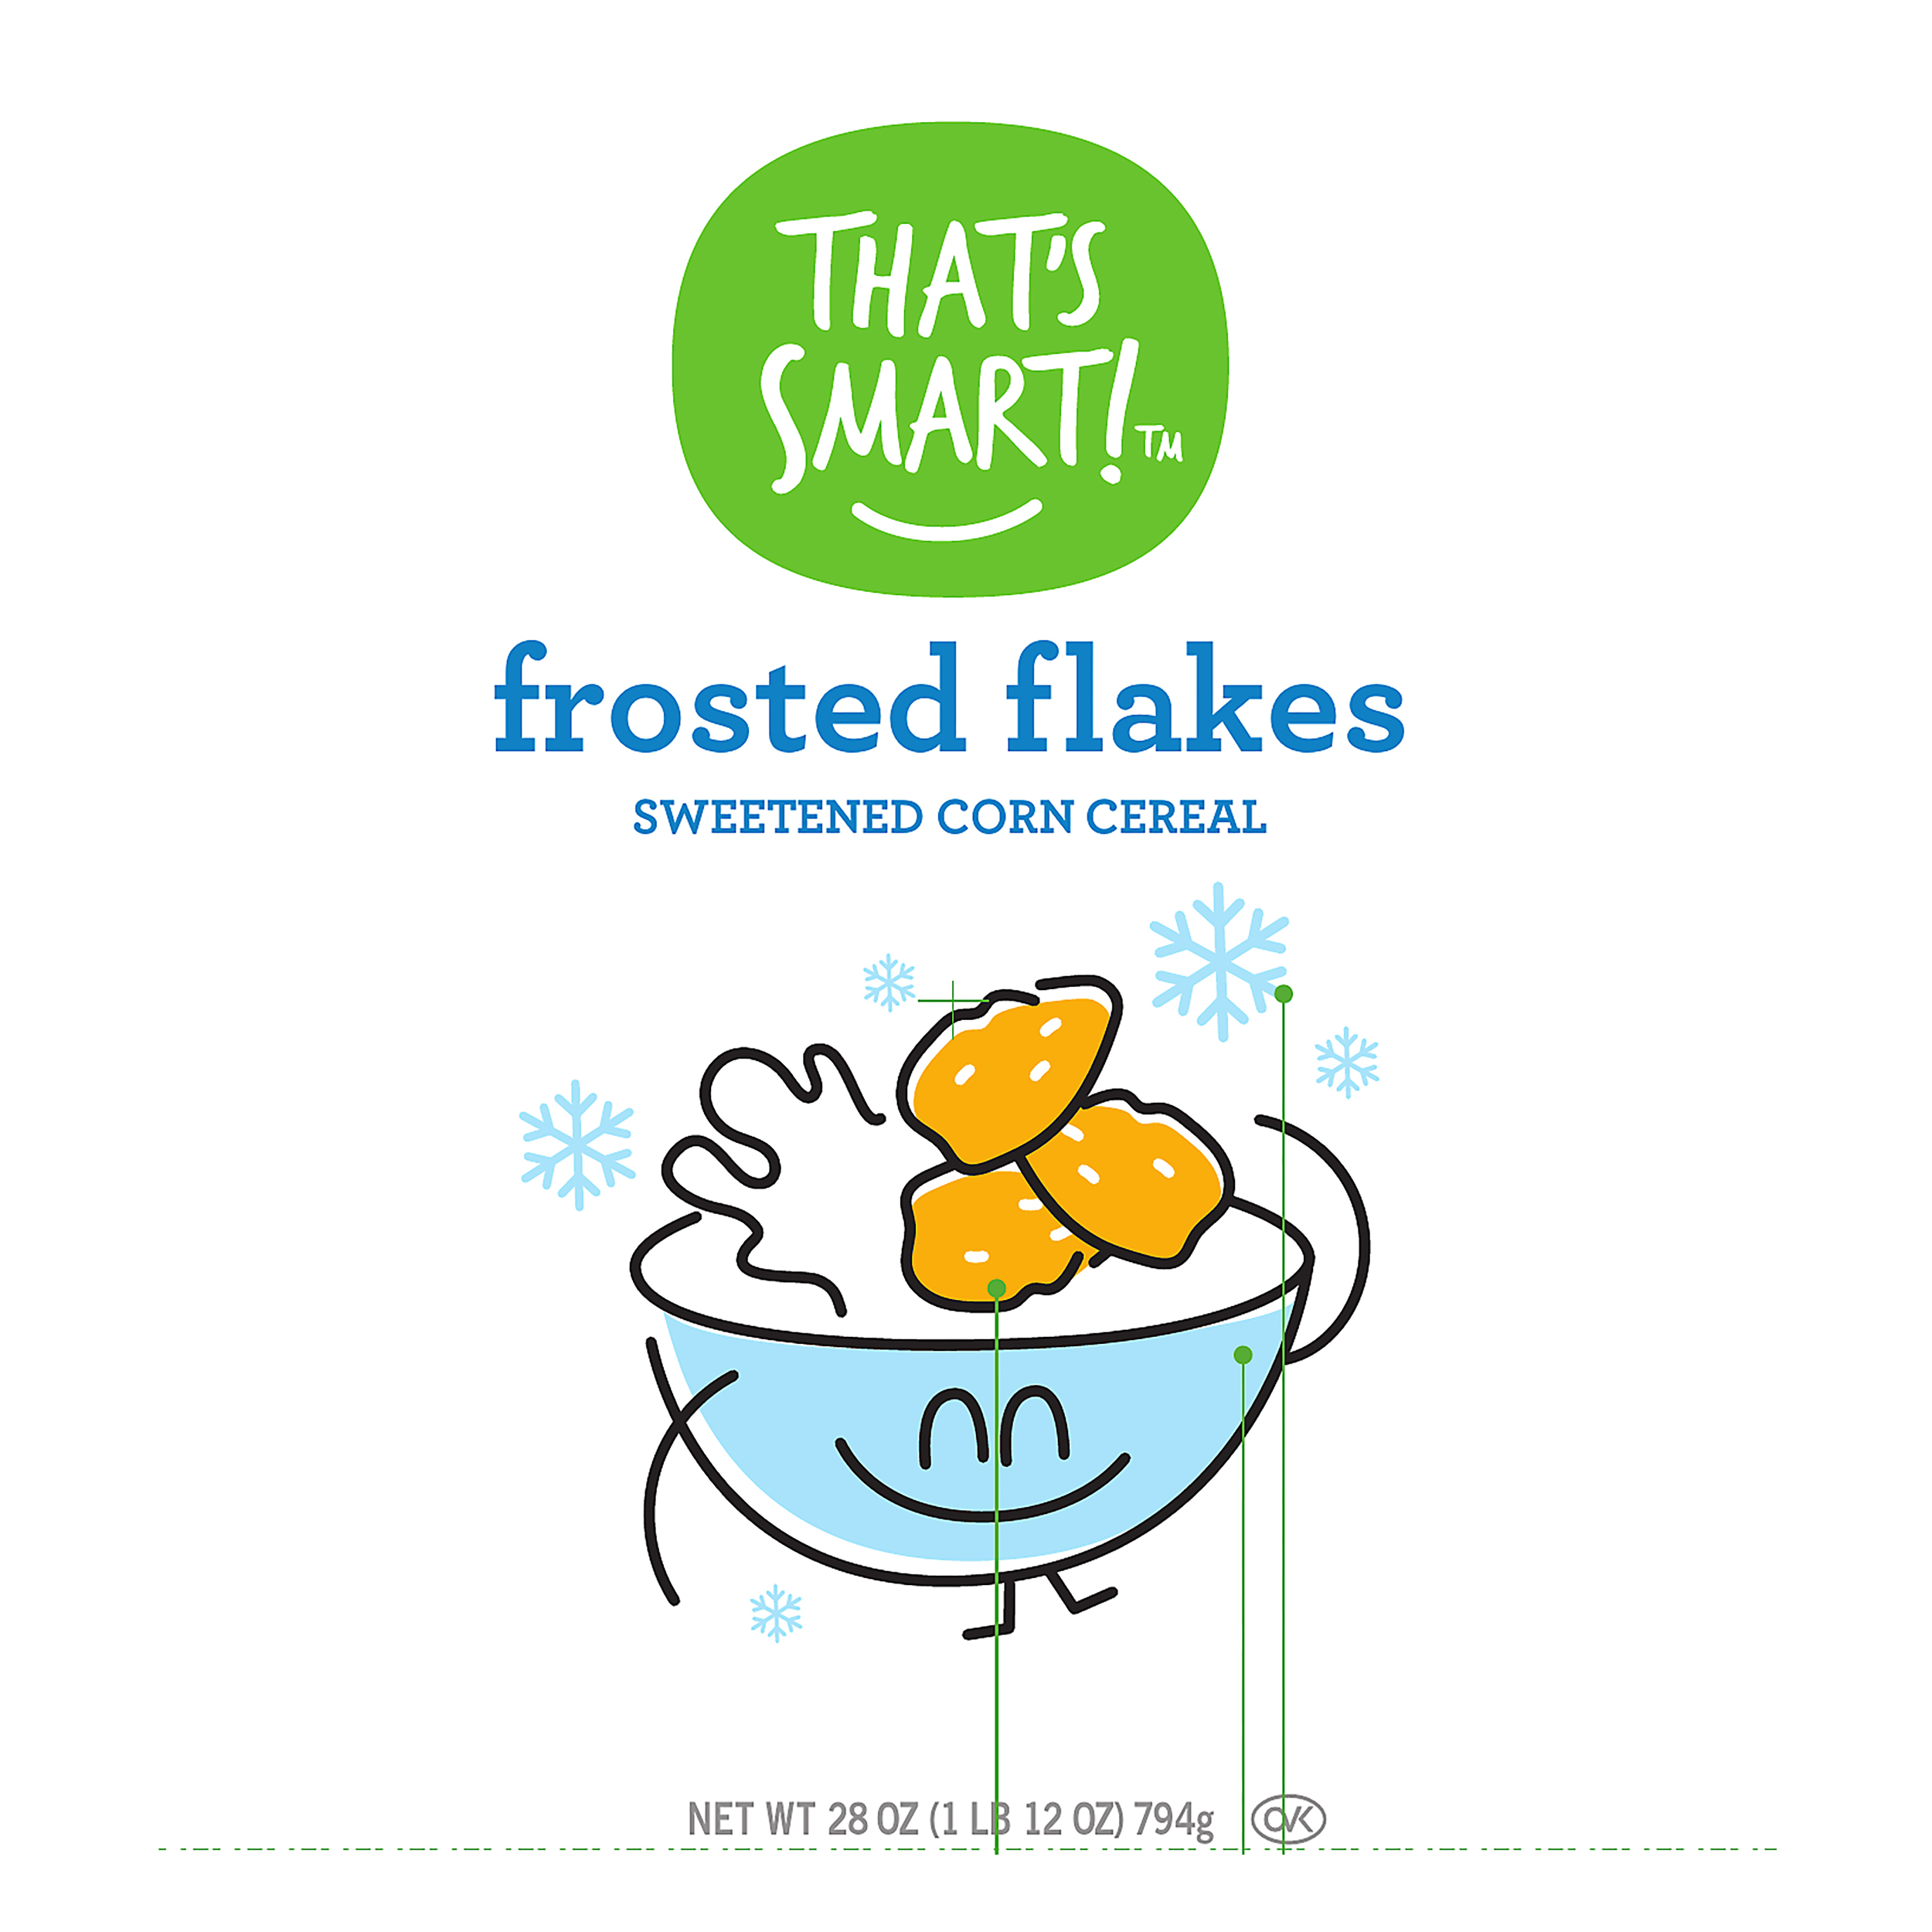 Frosted Flakes Sweetened Flakes of Corn Cereal 14.5 oz.